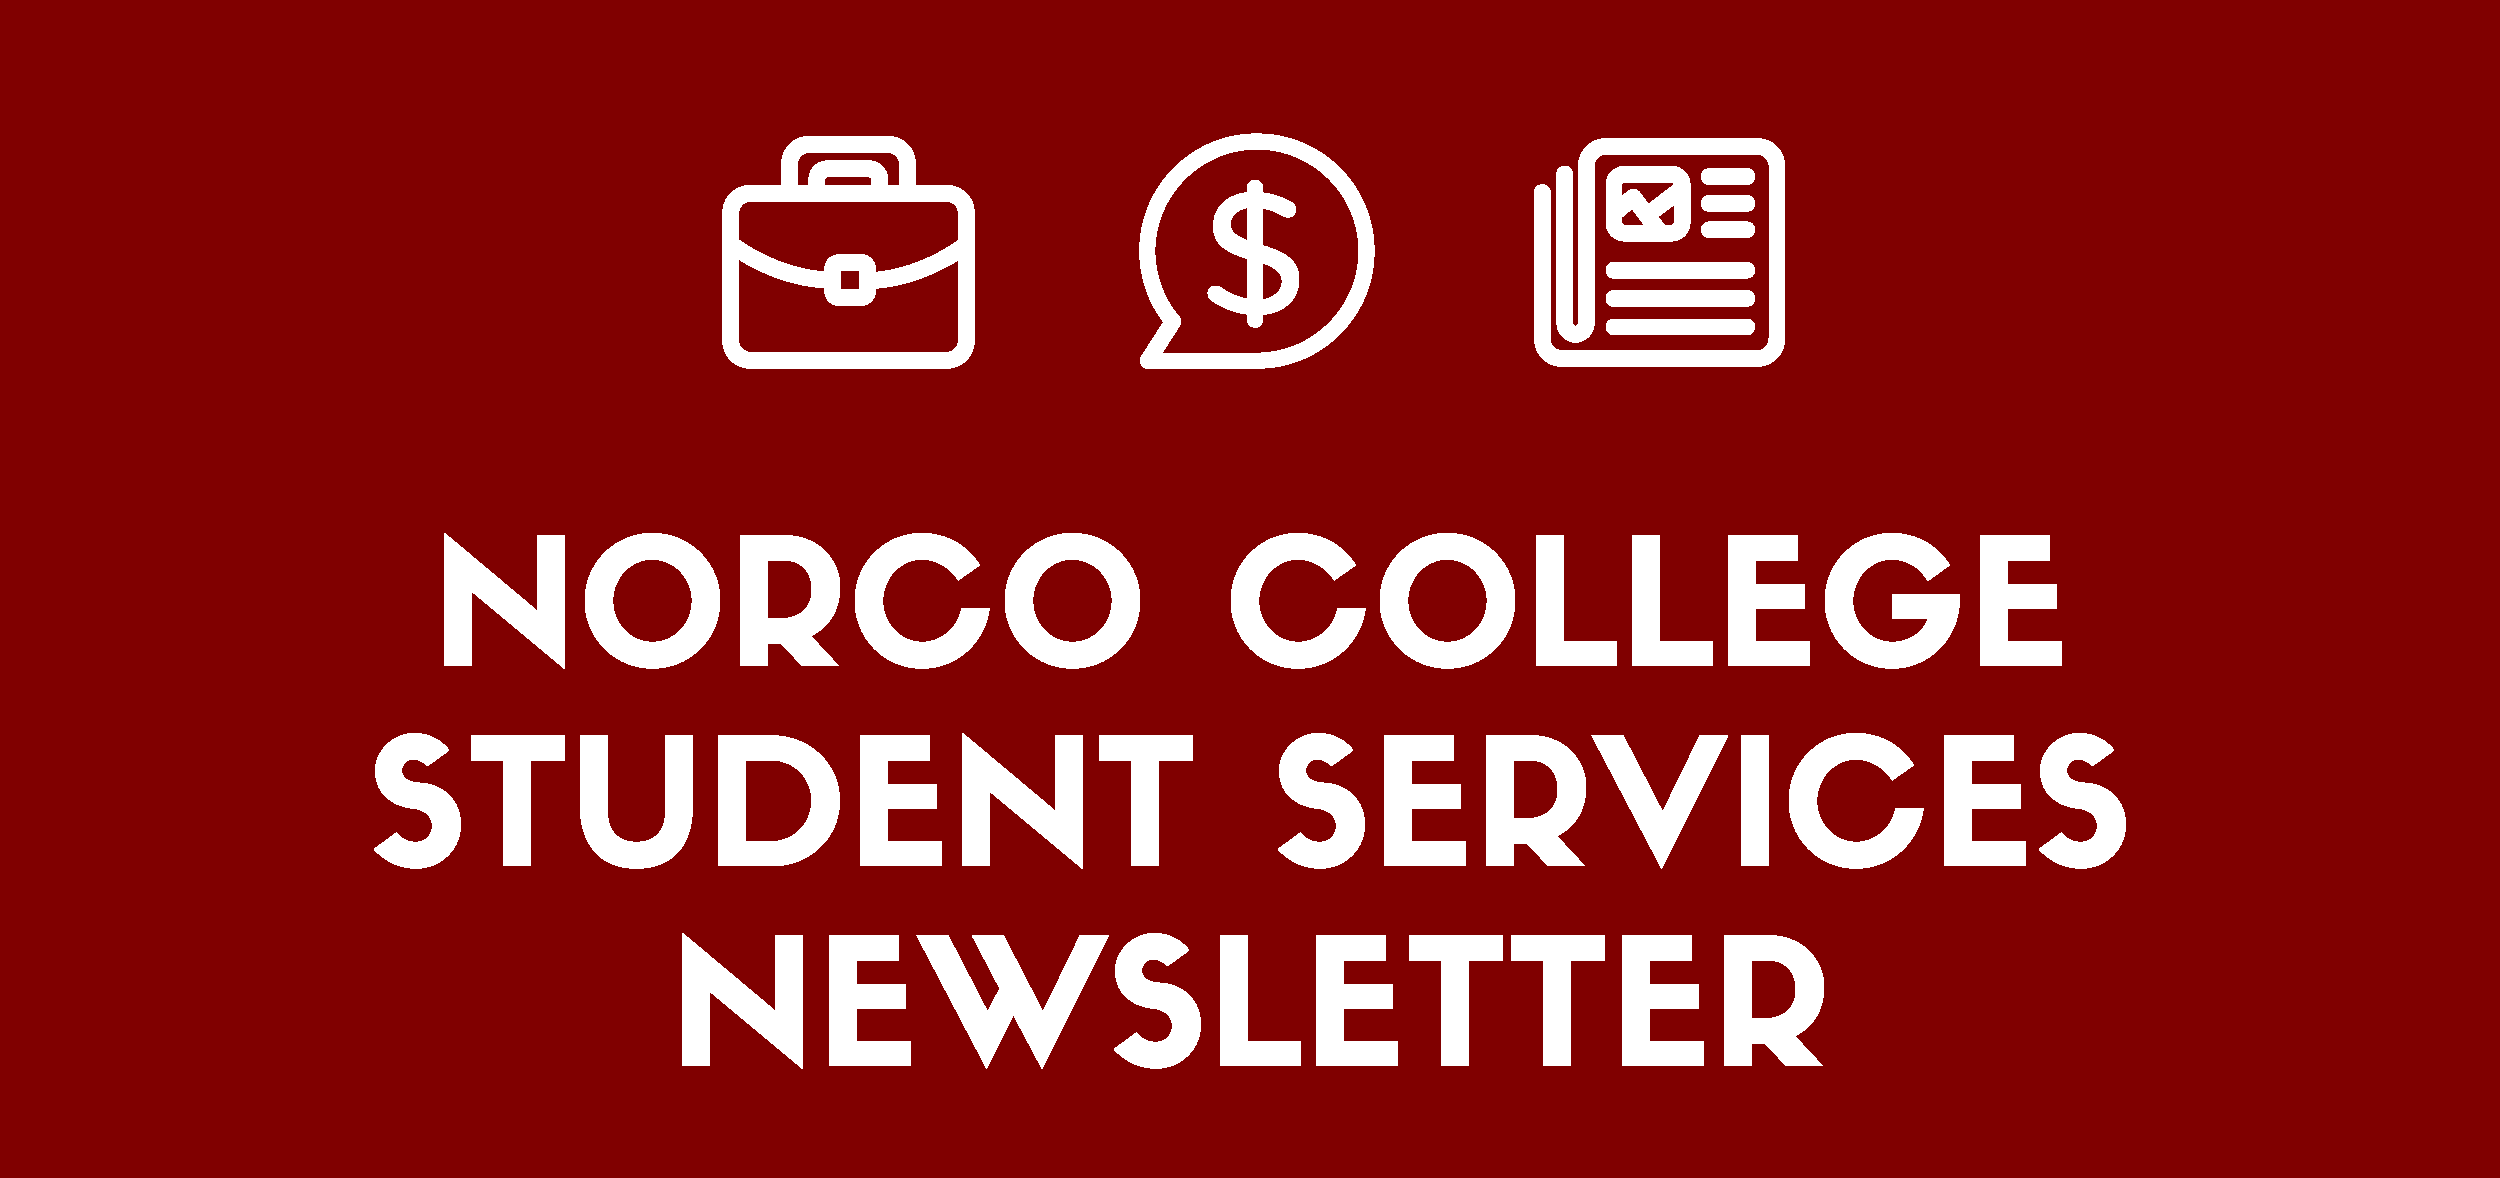 Norco College Student Services Weekly Newsletter logo